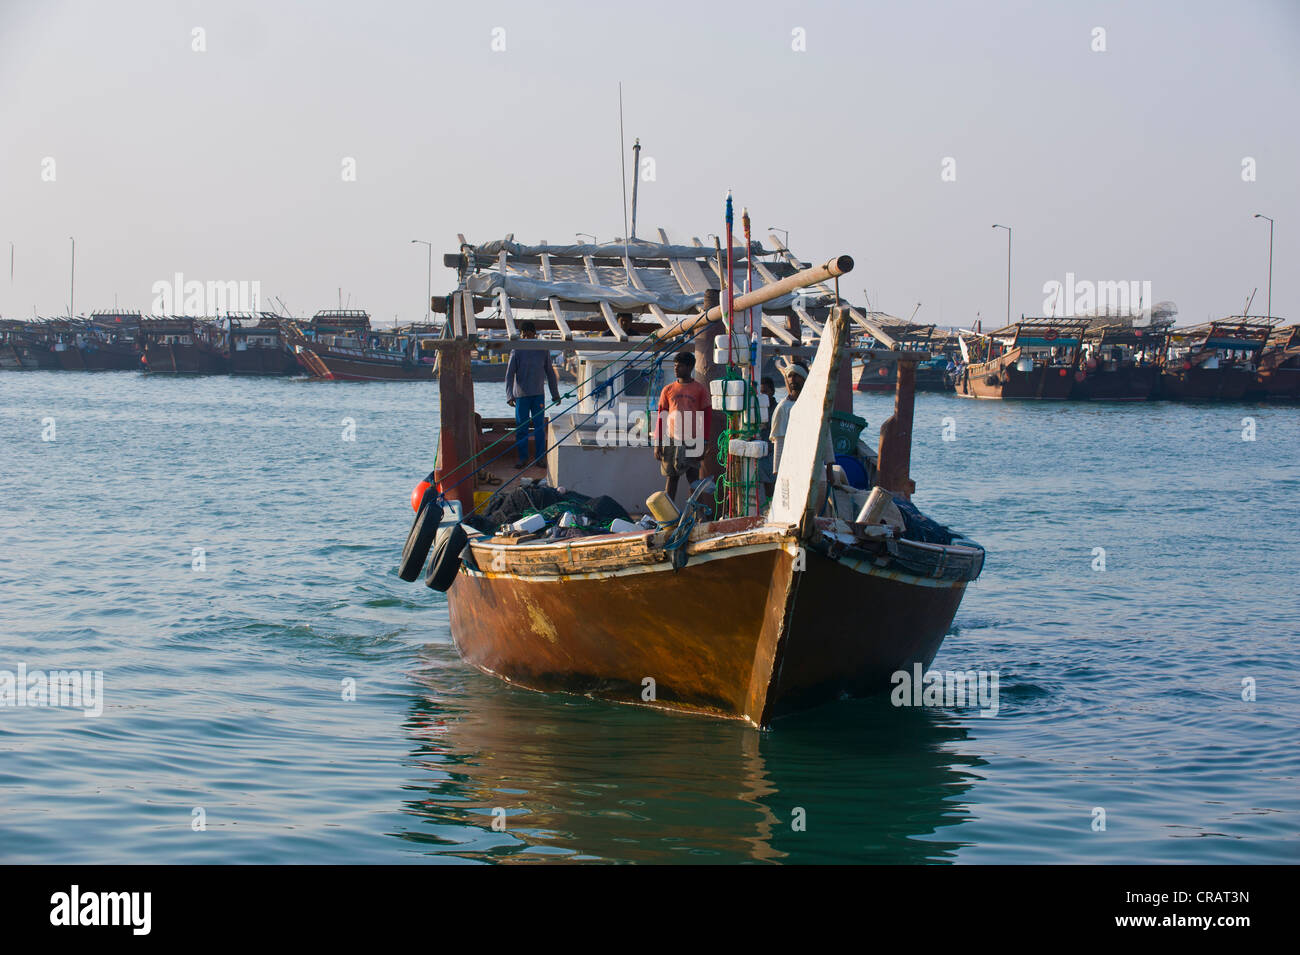 Dhow in the port of Khor, Qatar, Arabian Peninsula, Middle East Stock Photo